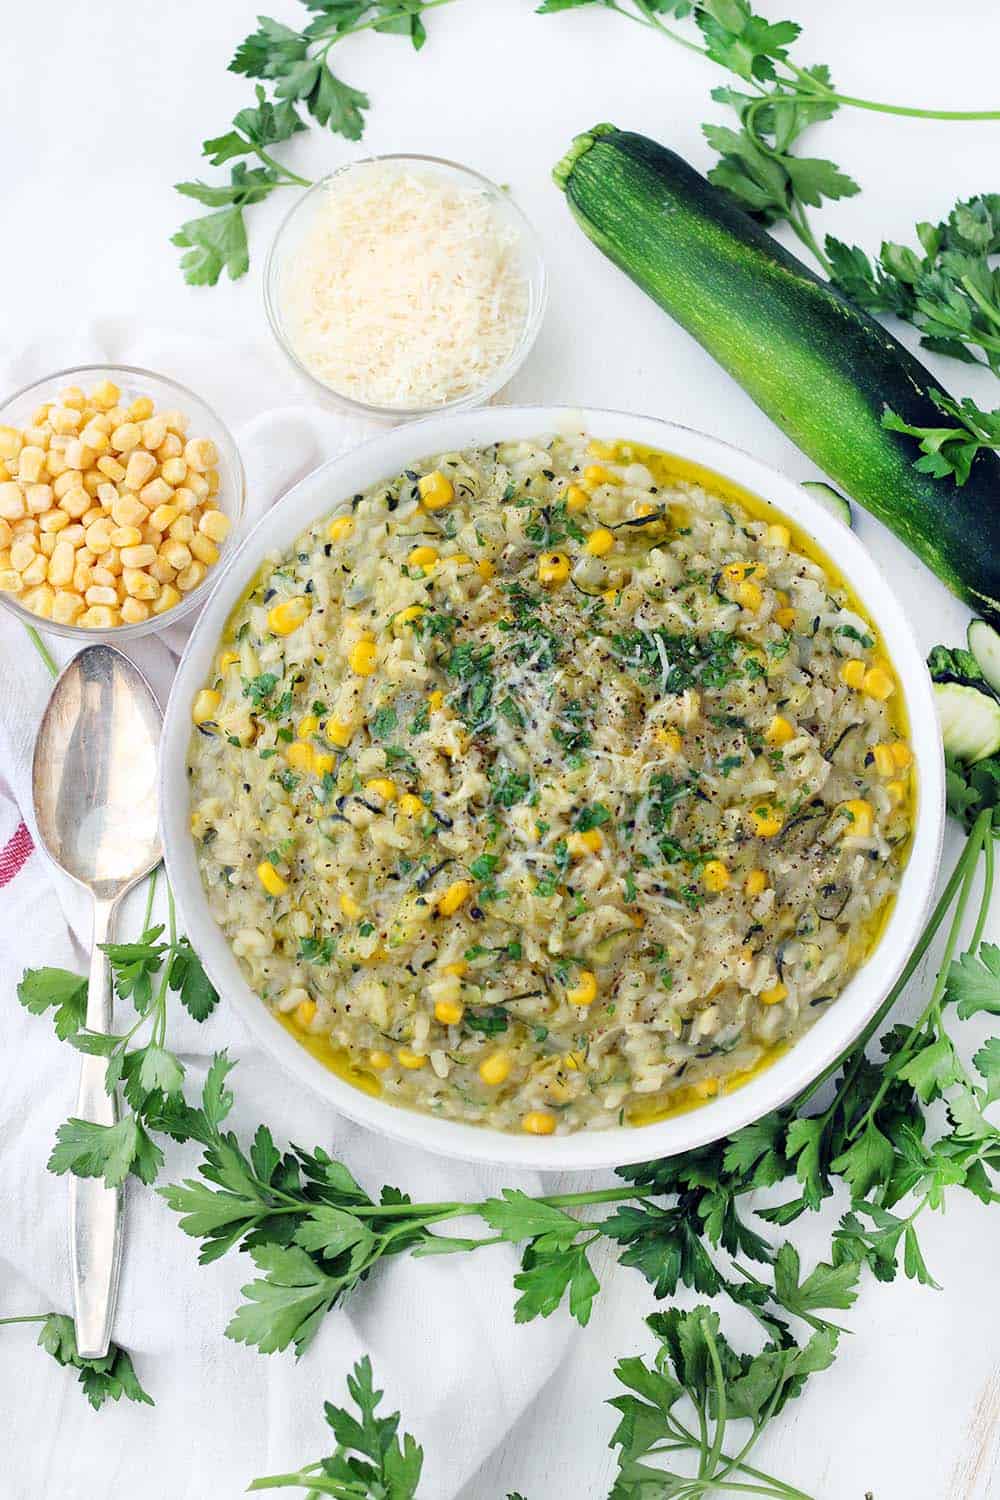 This vegetarian sweet corn and zucchini risotto recipe is such a great way to enjoy summertime vegetables! The zucchini is grated, so it melts into every bite while still maintaining a great texture, and the corn cobs are used to add flavor and starch to the broth base. The leftovers are great for brunch served with a fried egg on top.